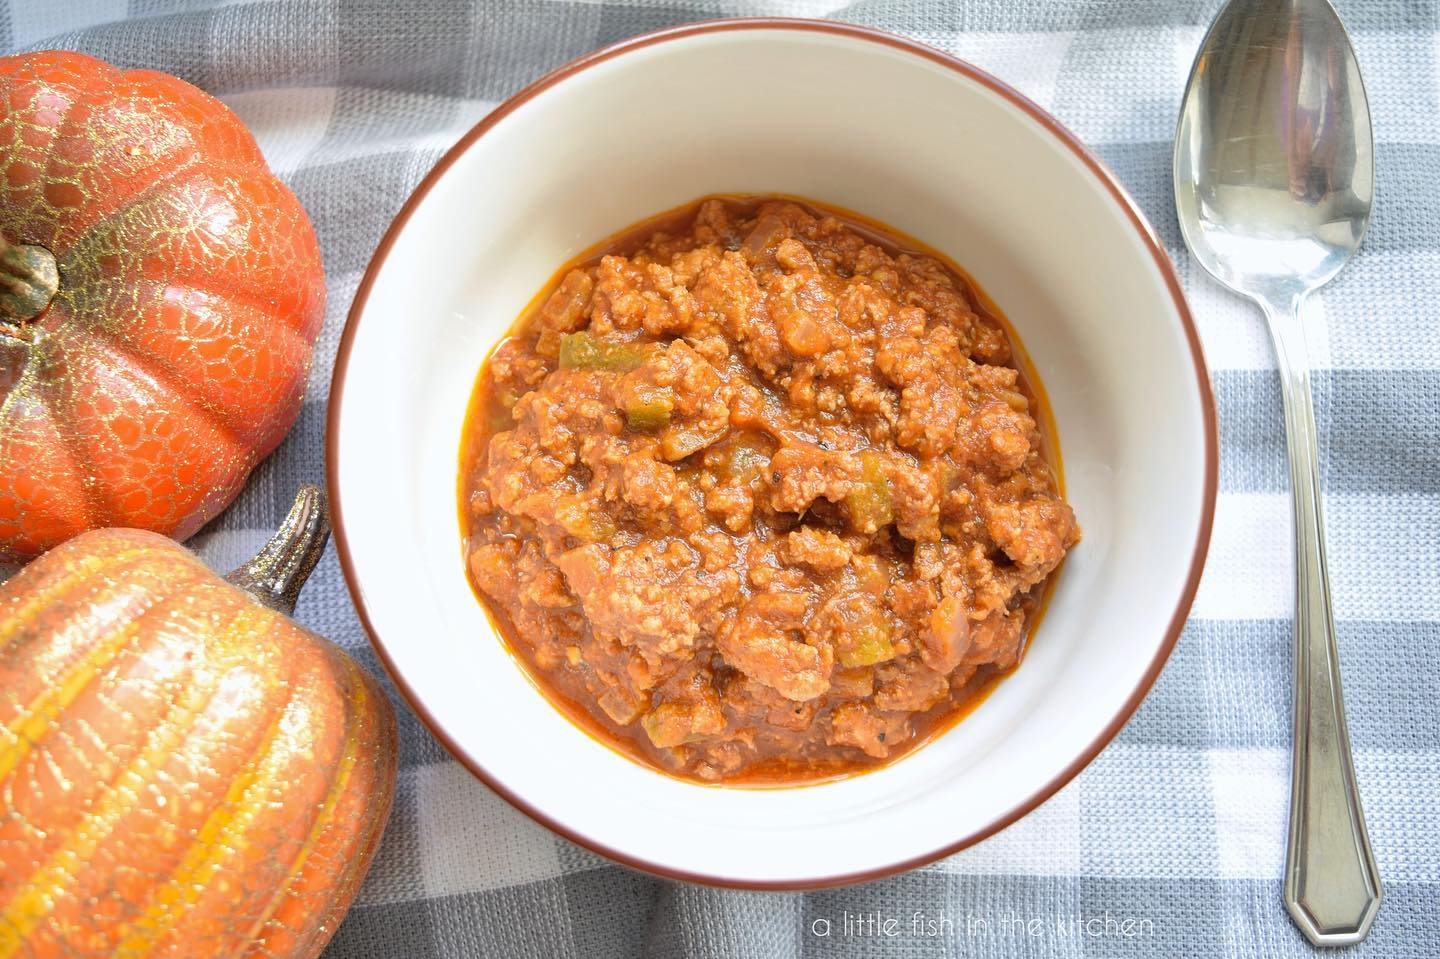 The recipe for this Quick Low Carb Pumpkin Chili is new to the blog this weekend! It’s honestly one of my favorite savory pumpkin recipes ever! Link to the recipe is in my bio! #pumpkinrecipes #savorypumpkinrecipes #pumpkineverything #autumnvibes #flavorsofautumn #eeeeeats #bhgfood #huffposttaste #buzzfeast  #delicious #eatwithyoureyes #lowcarb #lowcarbfallrecipes